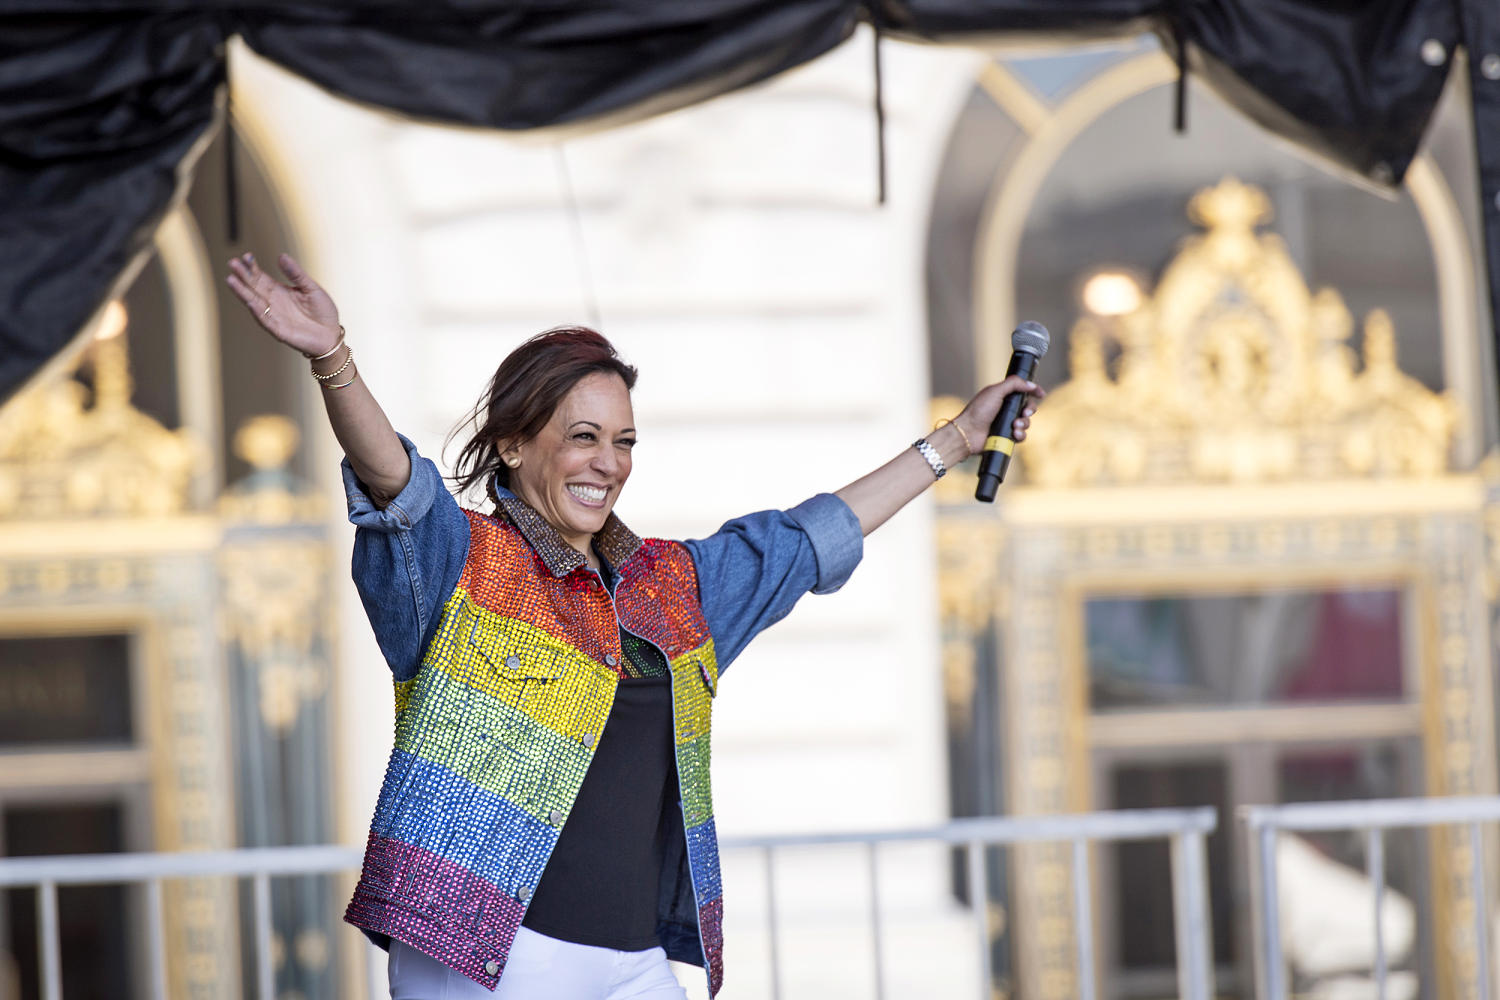 LGBTQ celebrities and lawmakers come out in support of Kamala Harris